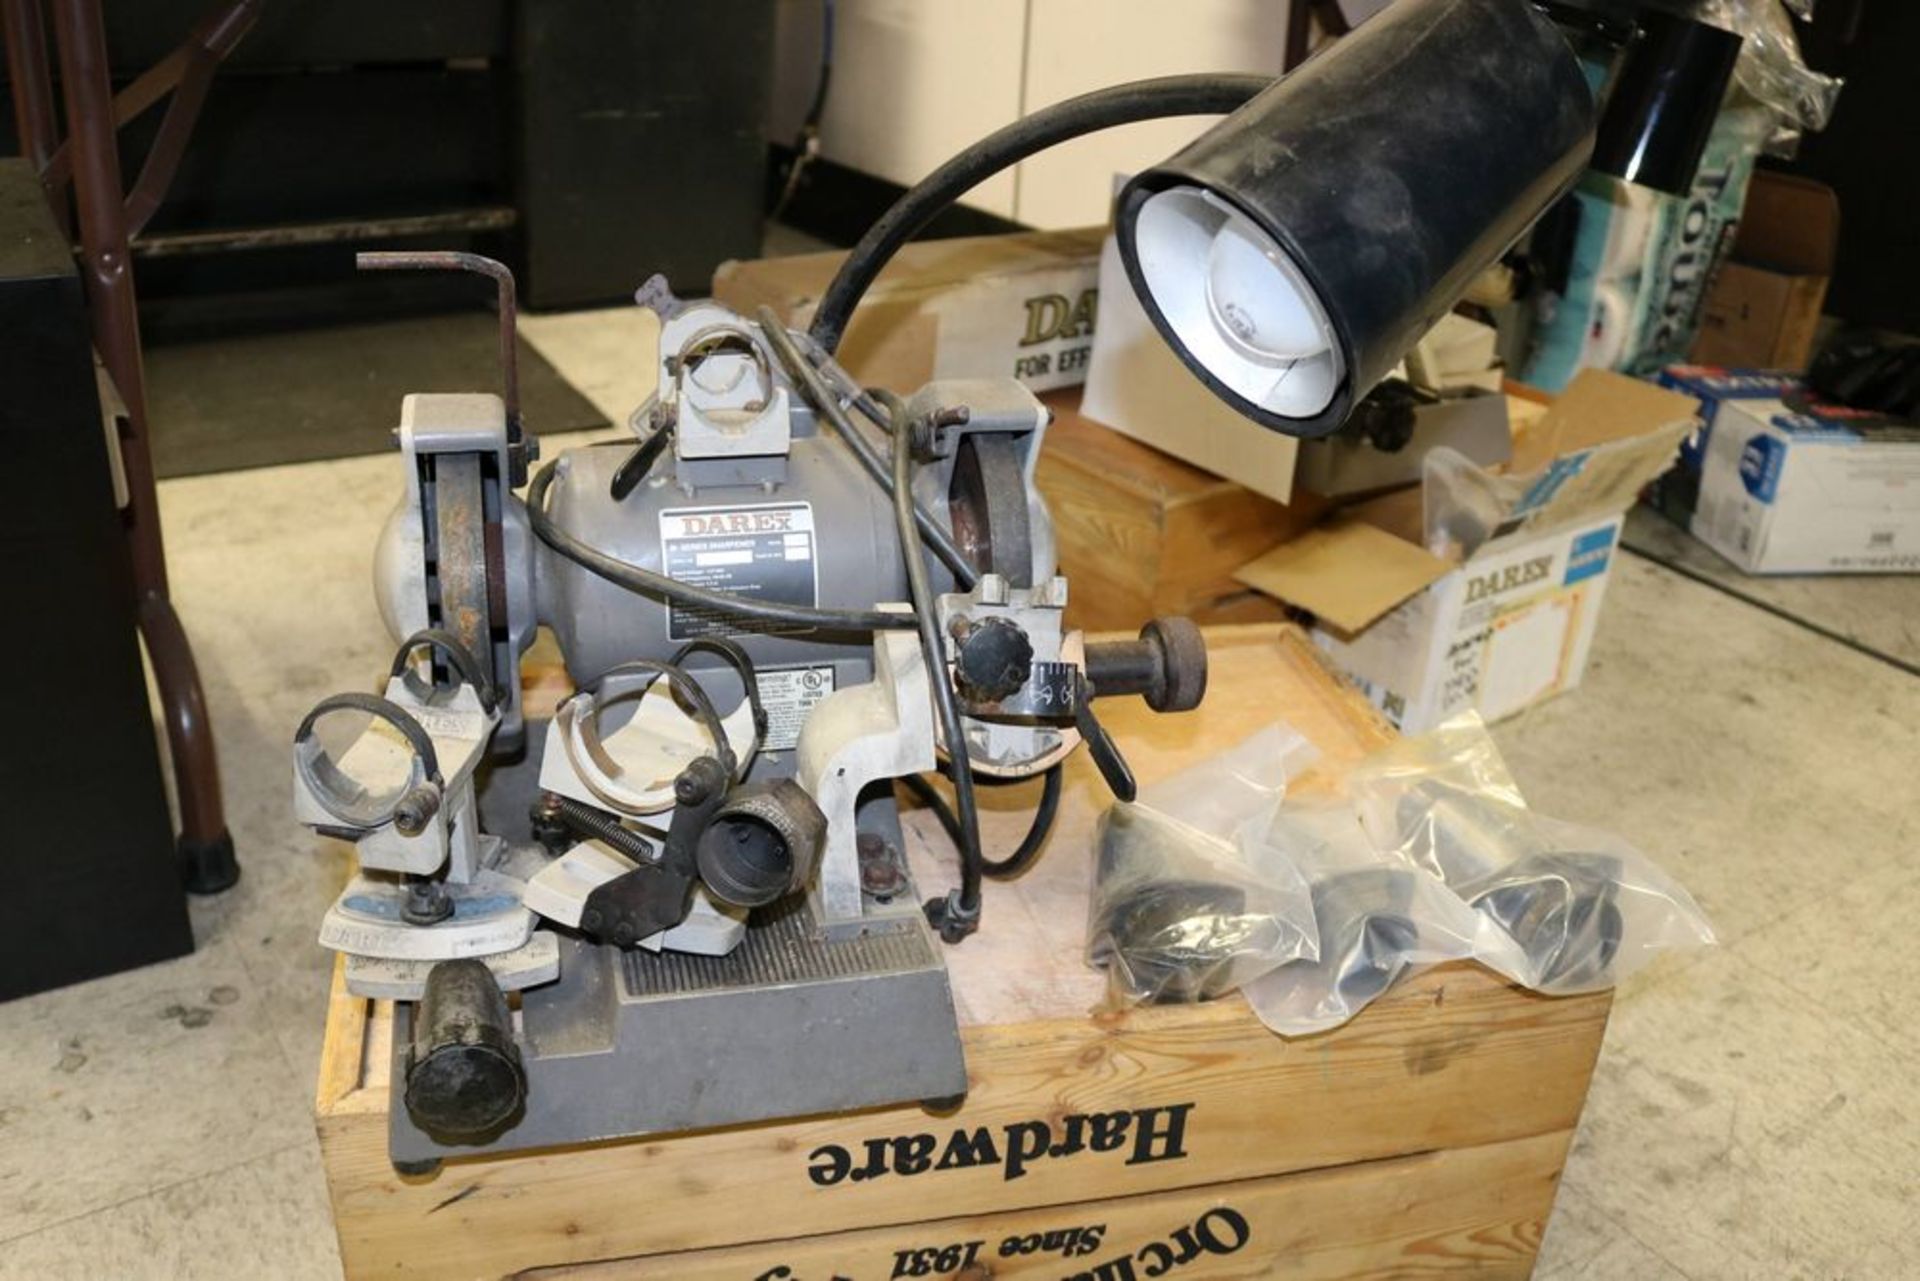 Used Darex M-Series Precision Tool Sharpener with Accessories and Tool Holders